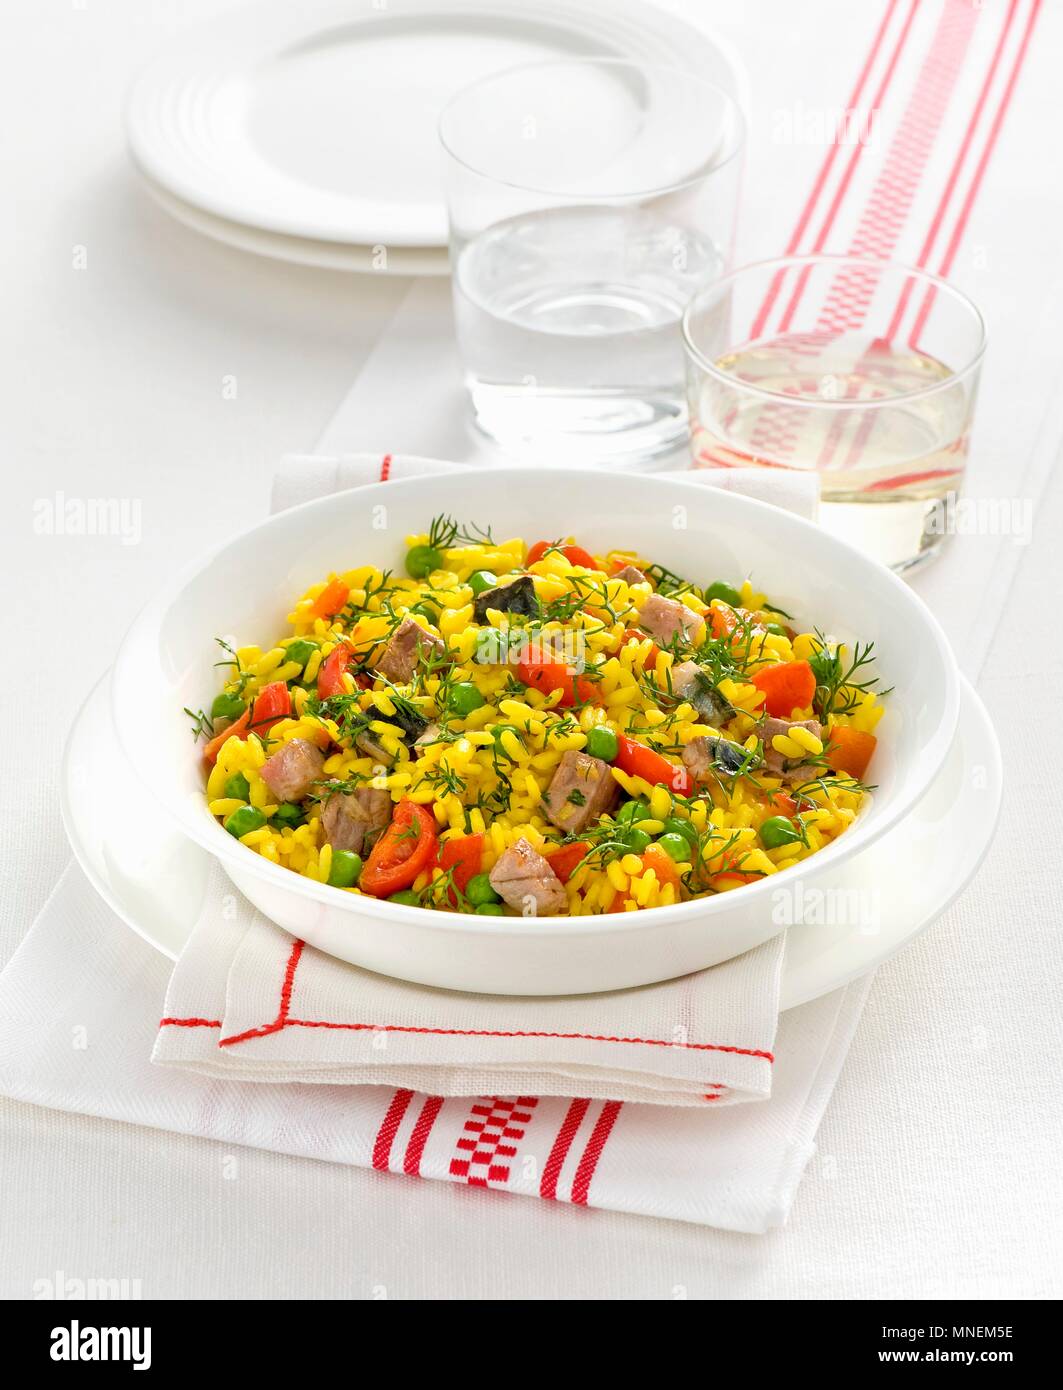 Risotto with saffron, meat and vegetables Stock Photo